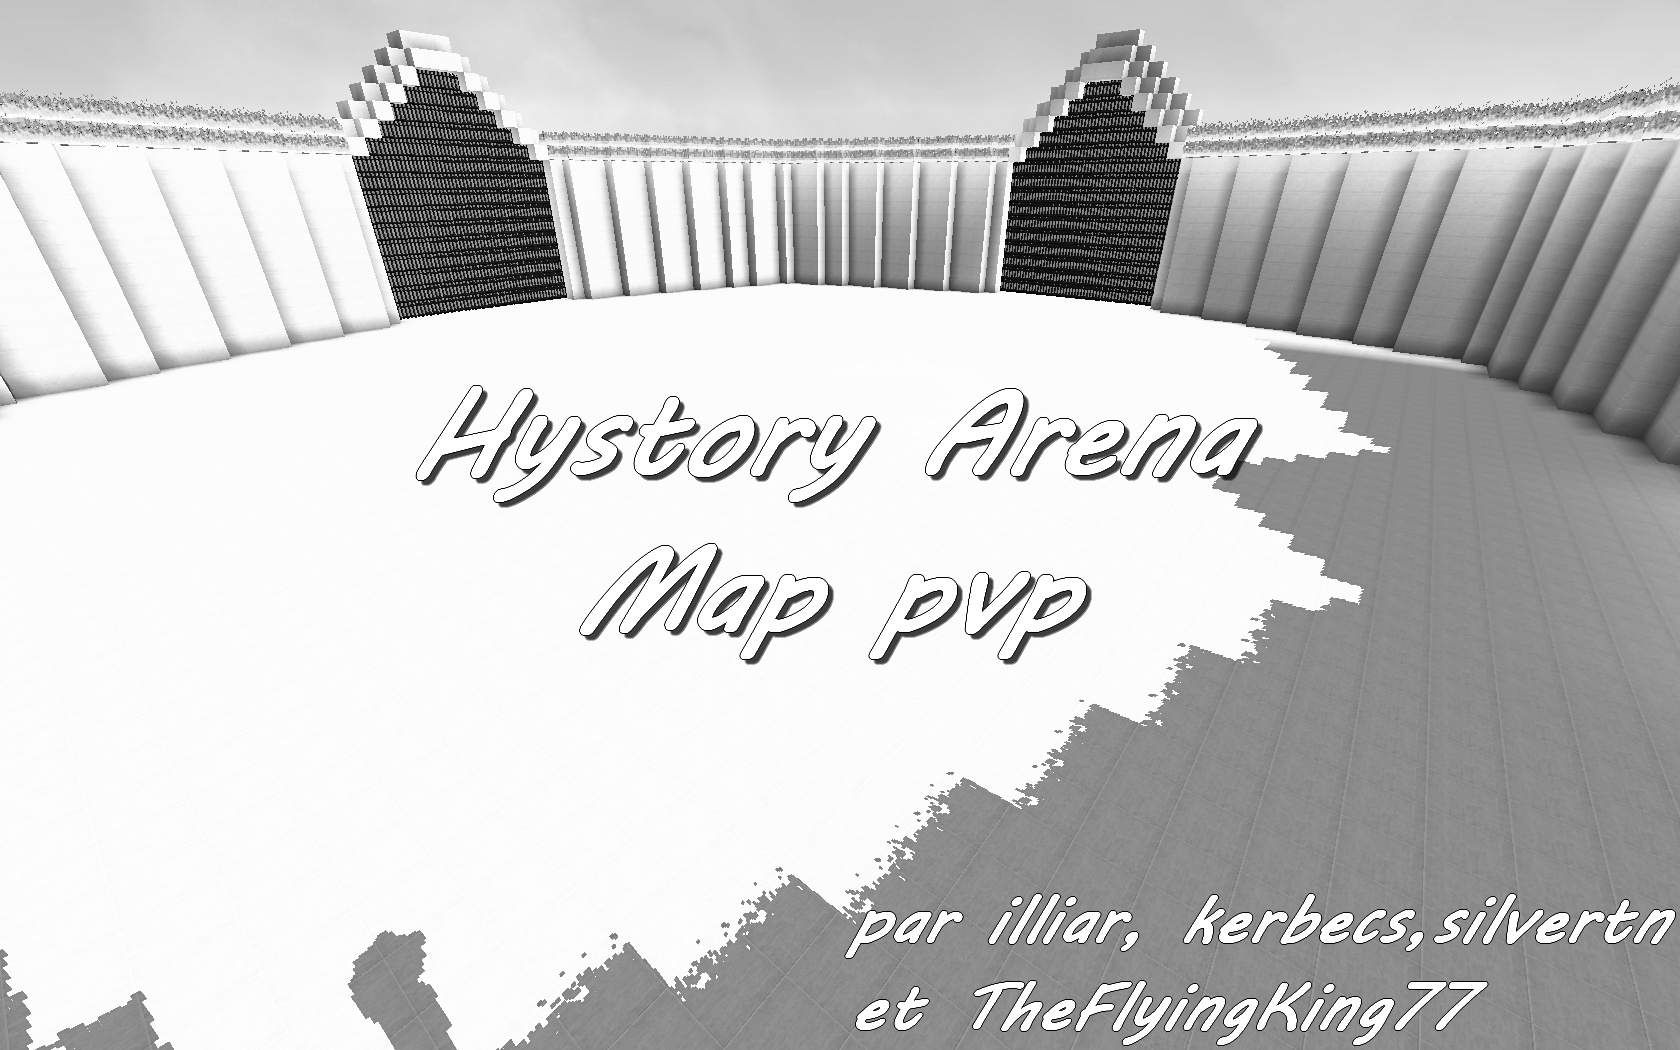 minecraft-map-pvp-hystory-arena